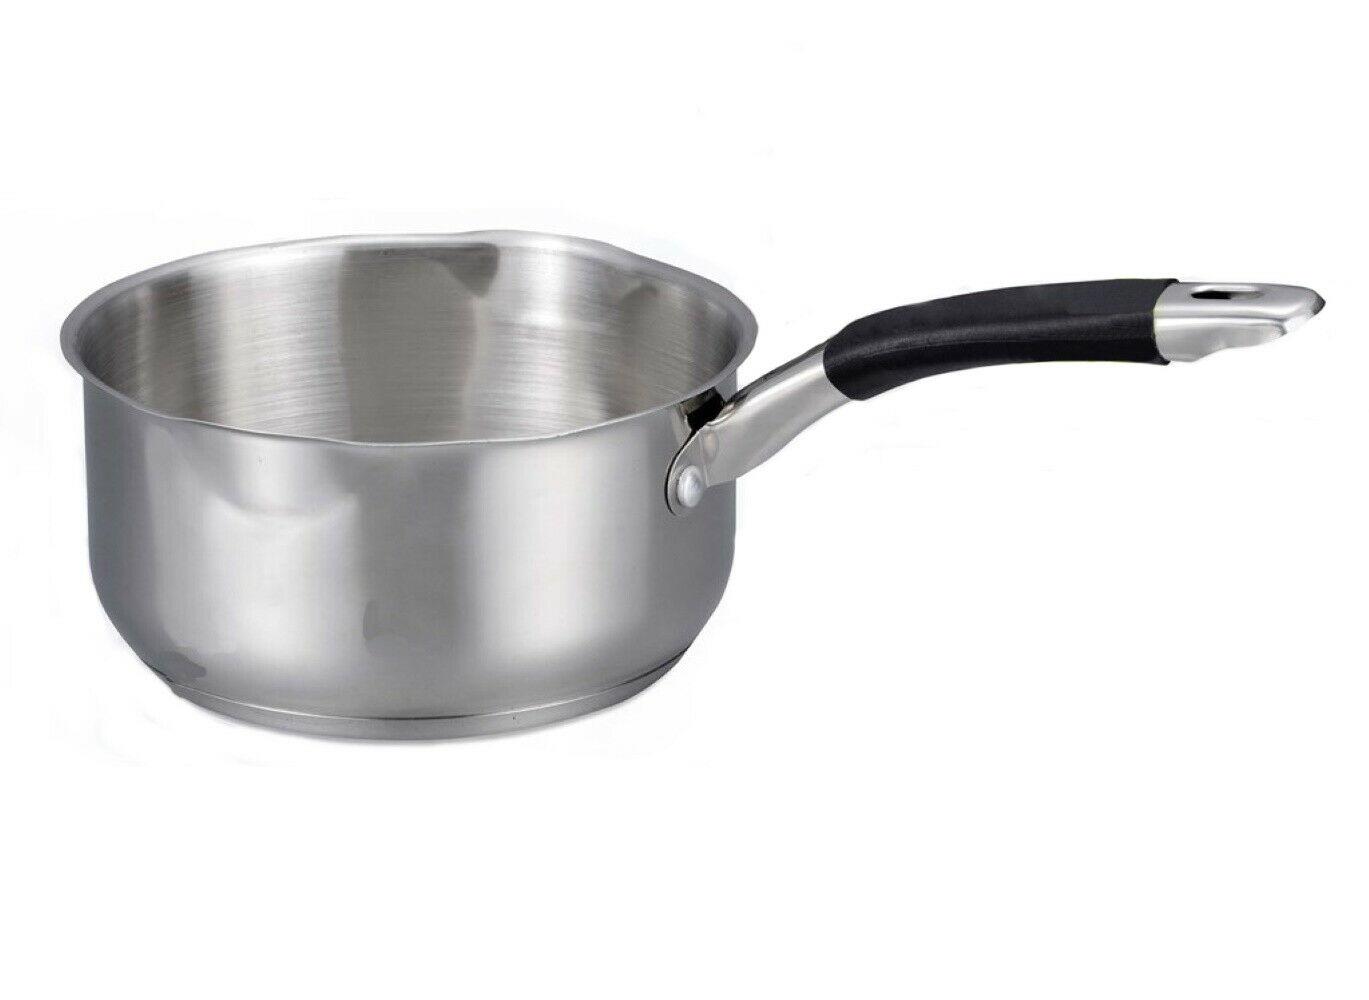 Details about   Induction Milk Pan Stainless Steel With 2 Double Pouring Lips Tea Sauce Pan Pot 